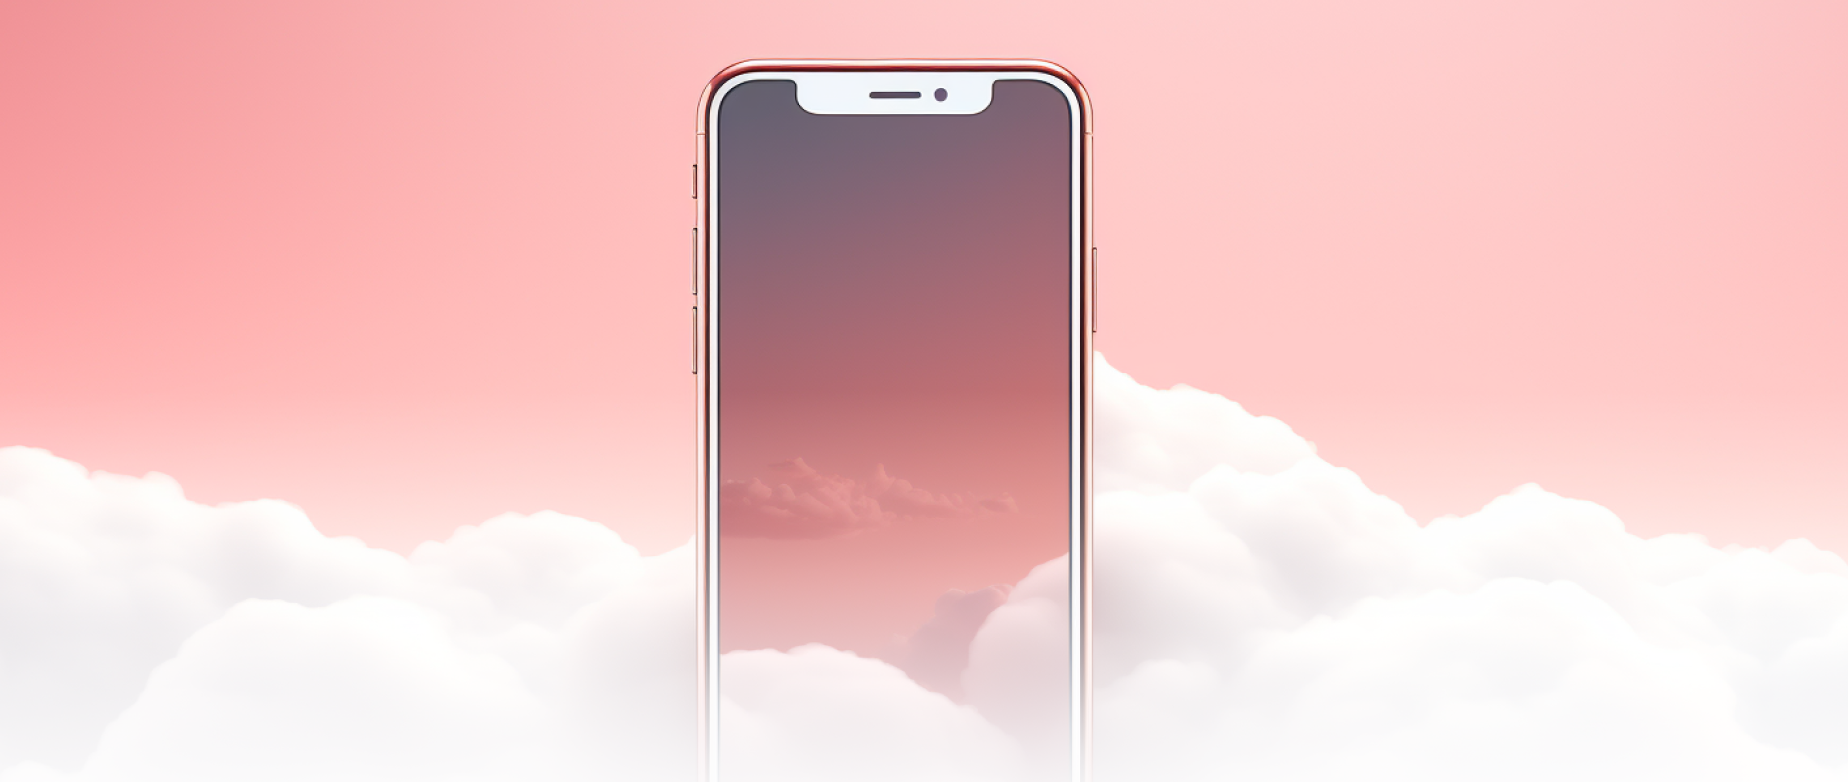 A phone in the clouds with a pink background.